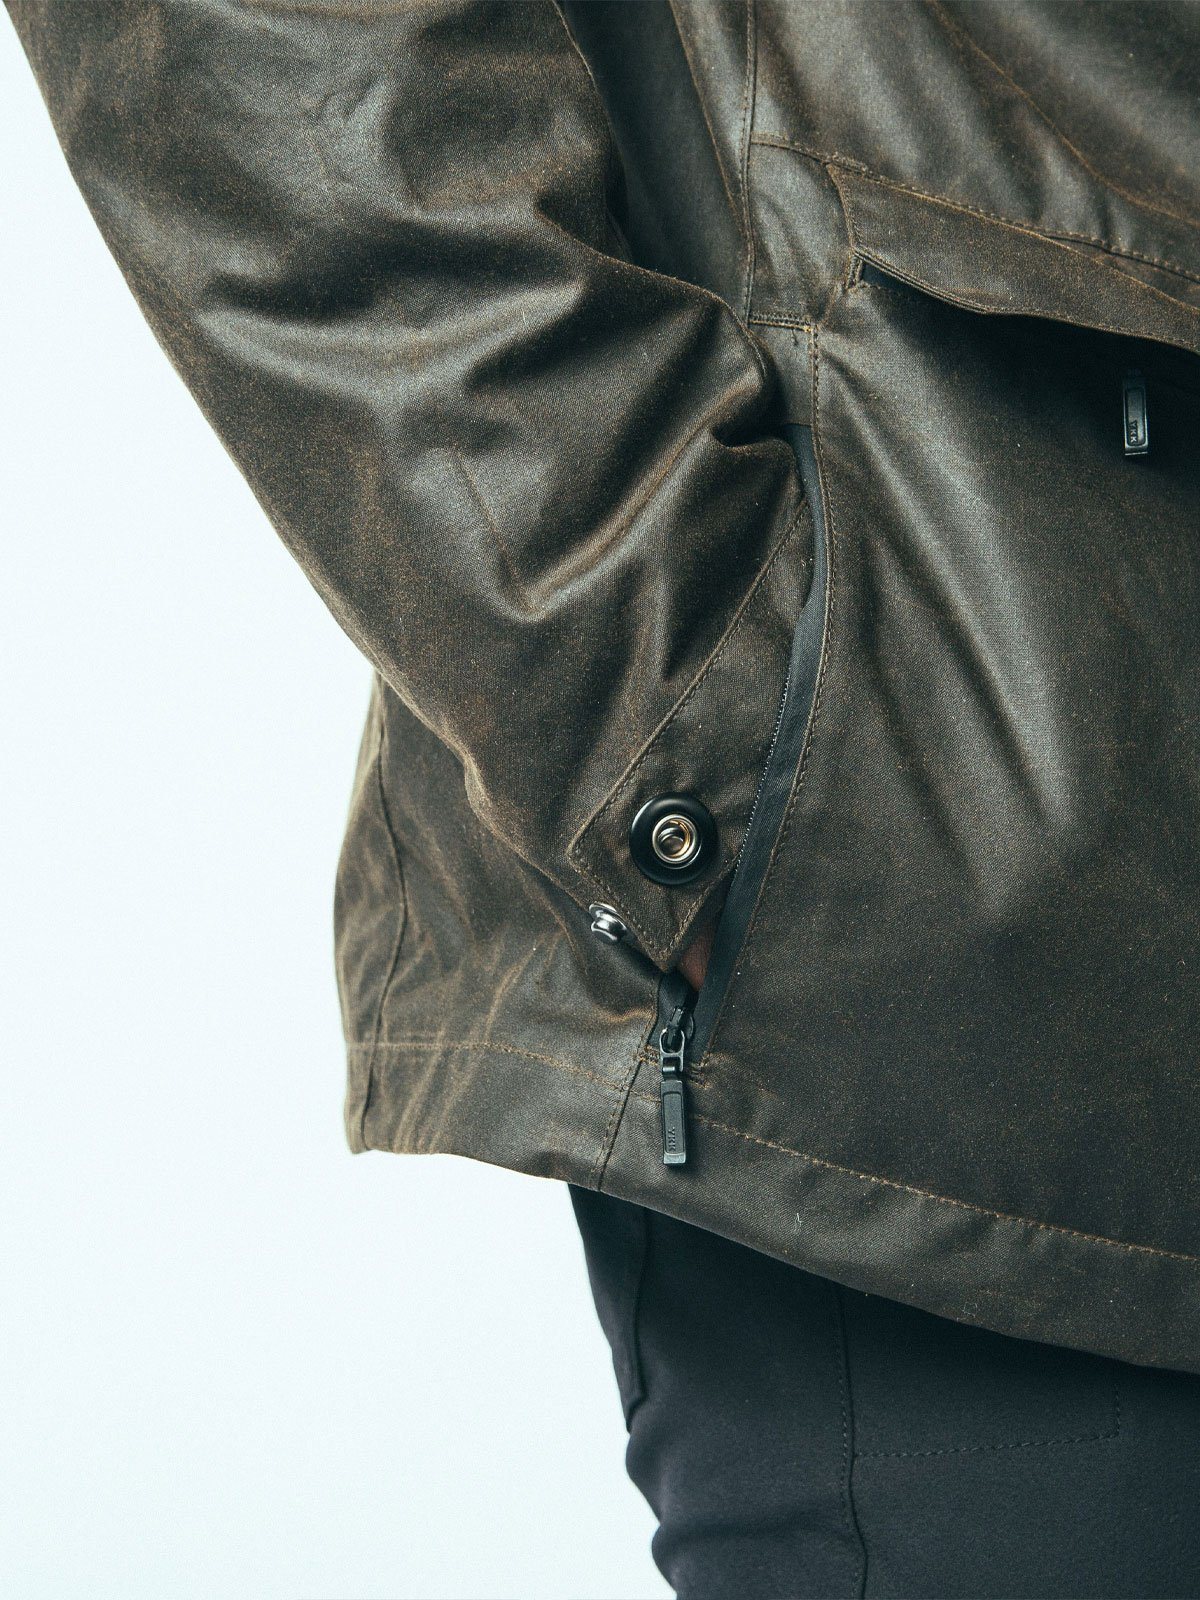 Eiger Waxed Canvas Jacket by Mission Workshop - Weatherproof Bags & Technical Apparel - San Francisco & Los Angeles - Built to endure - Guaranteed forever